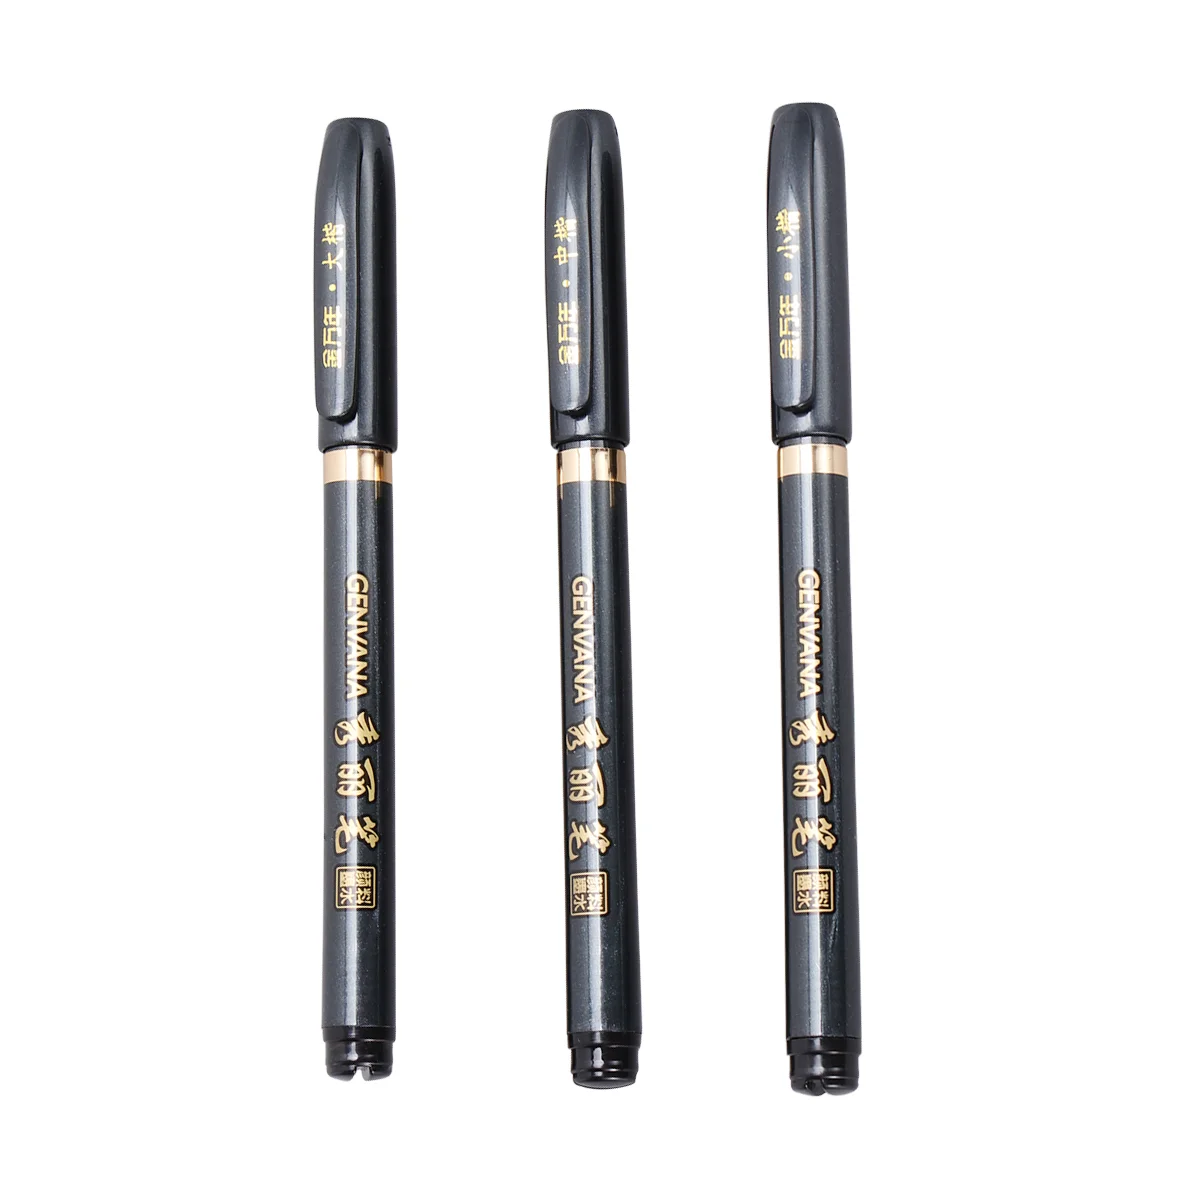 

3PCS Assorted Size Chinese Japanse Kanji Characters Calligraphy Brush Pen Writing Script Painting Tool Ink Pen